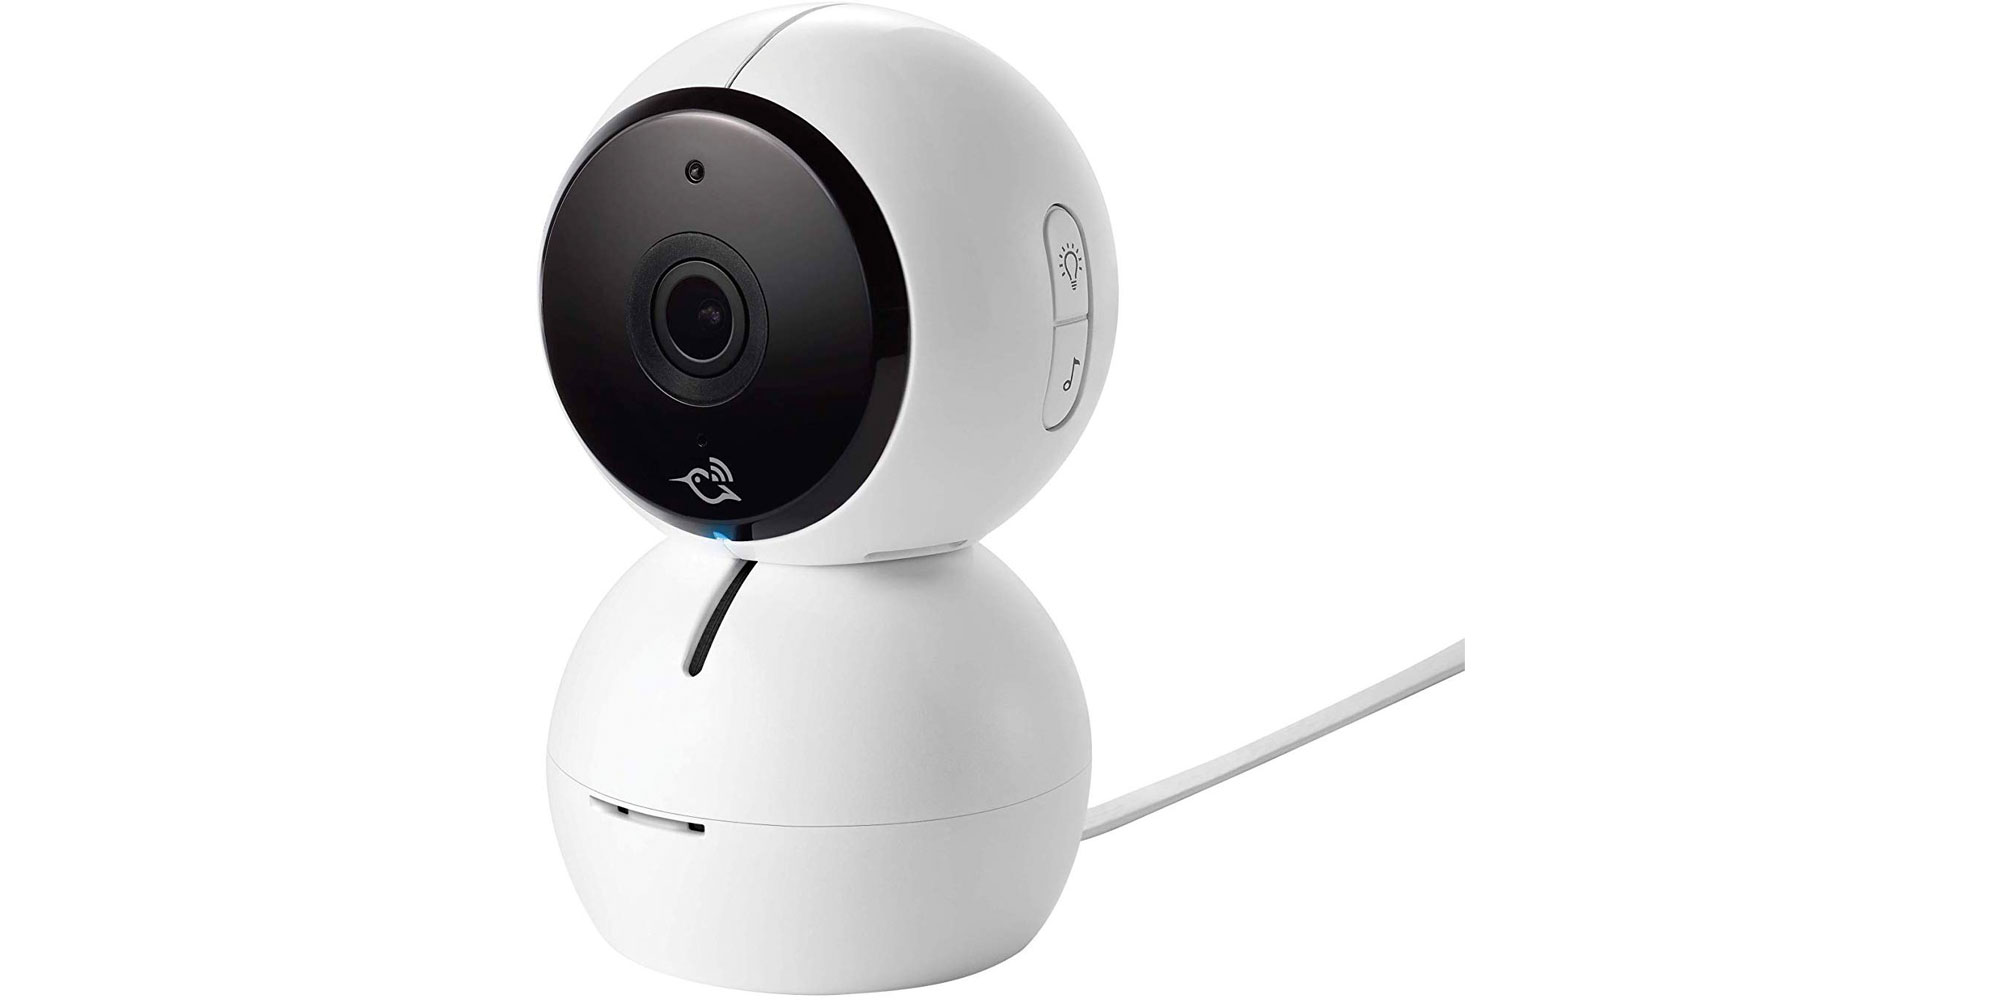 apple home baby monitor